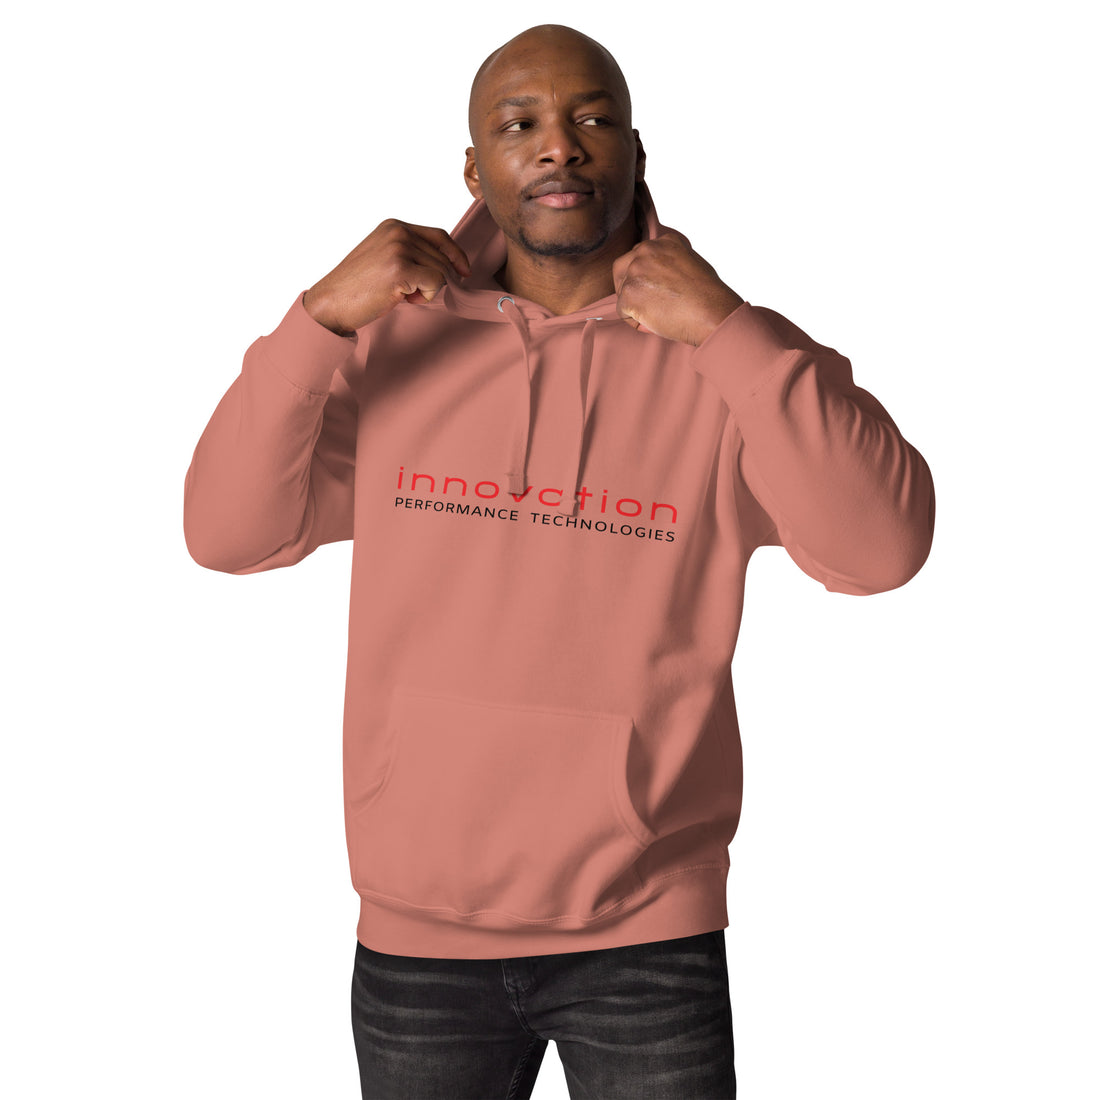 Patriotic Performance Hoodie: Supporting Veterans with Every Purchase